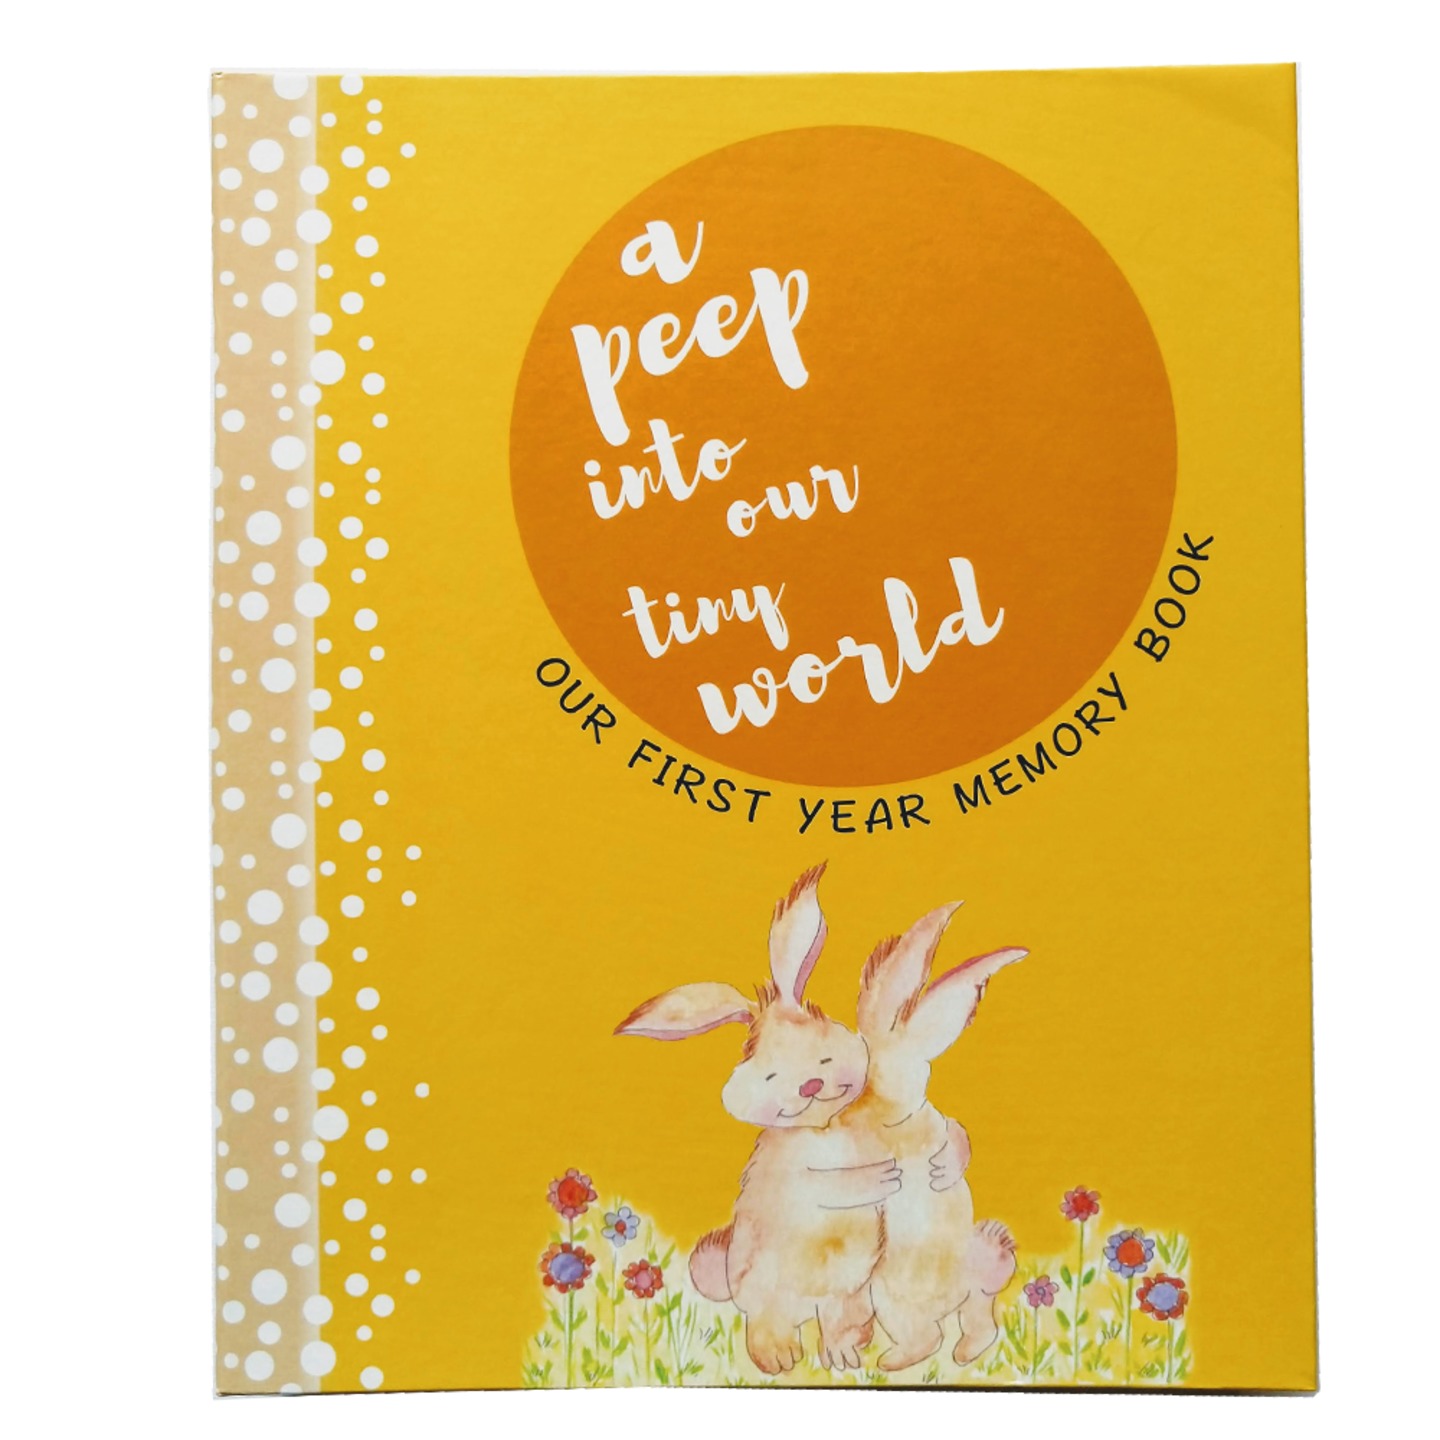 First Year Memory Book For Twins - Bunny Theme